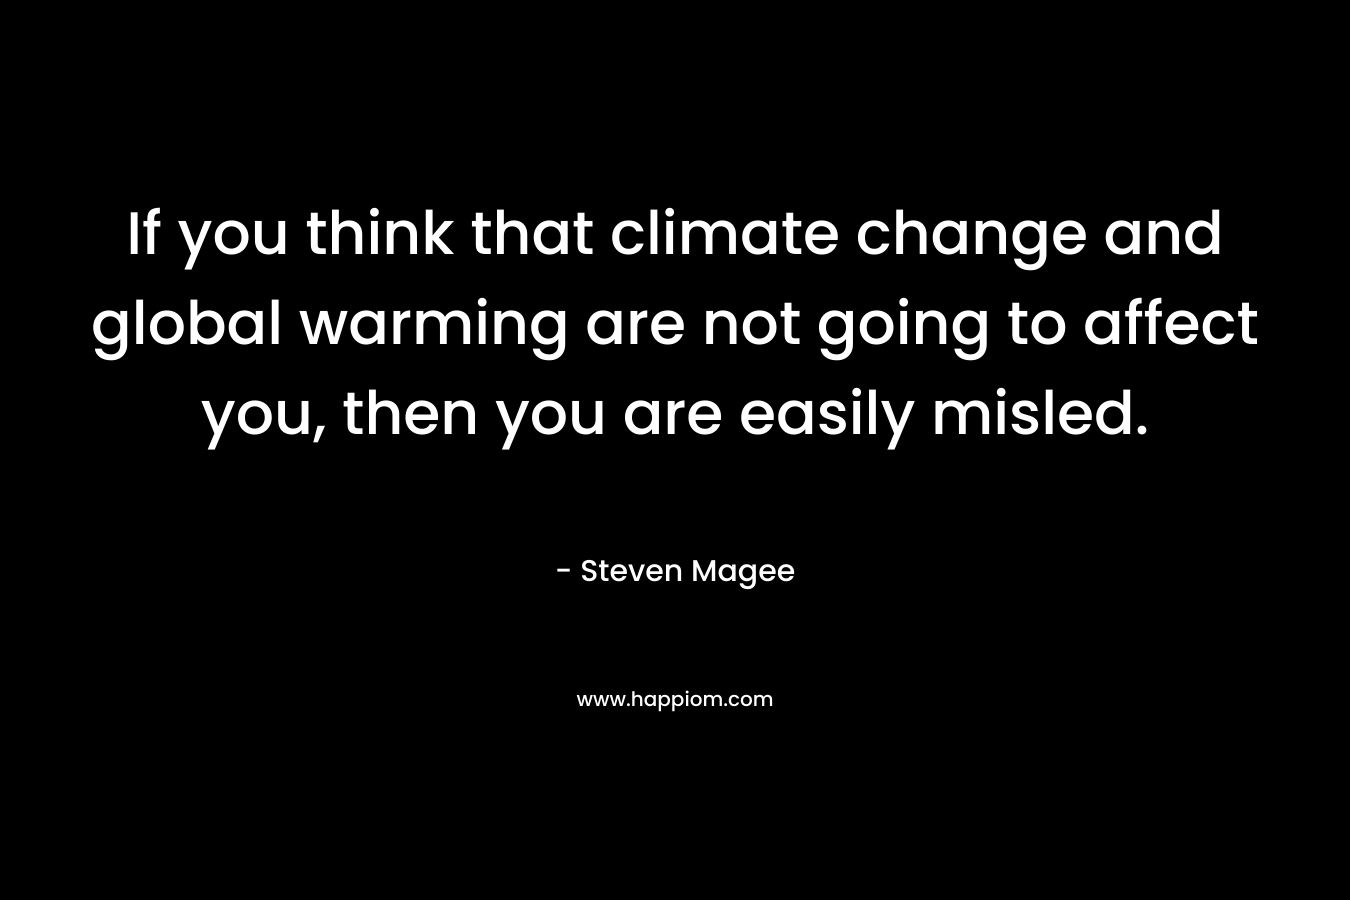 If you think that climate change and global warming are not going to affect you, then you are easily misled.